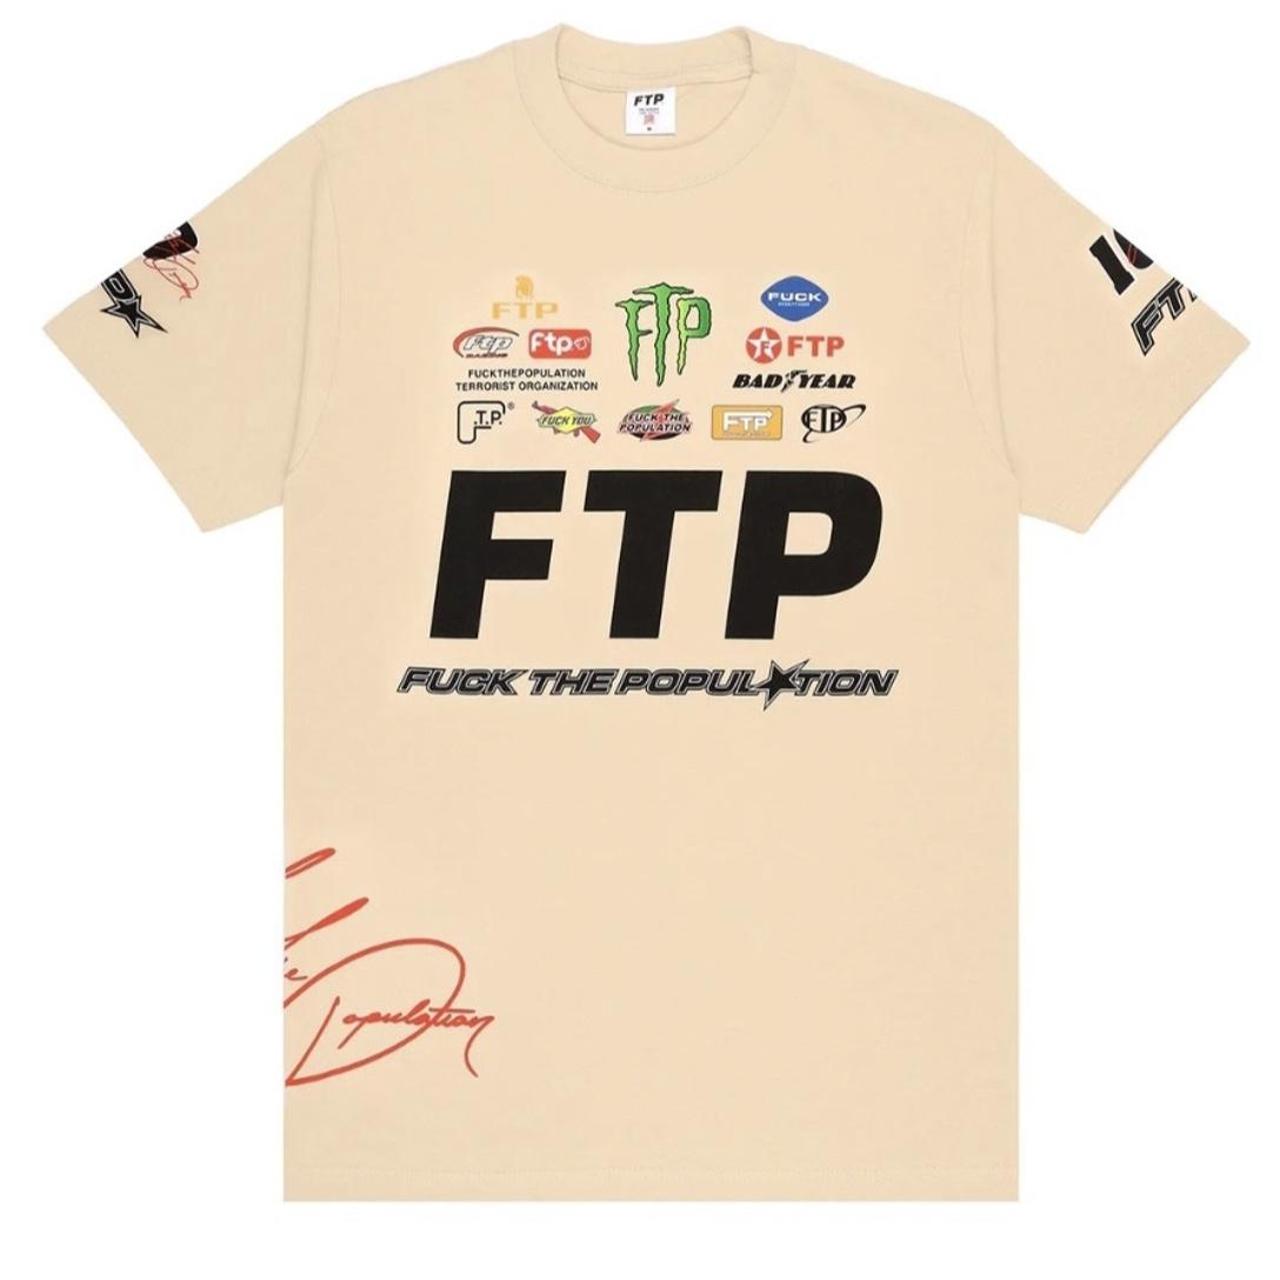 FTP PIT CREW TEE KHAKI, Sz XL Available , BRAND NEW IN...